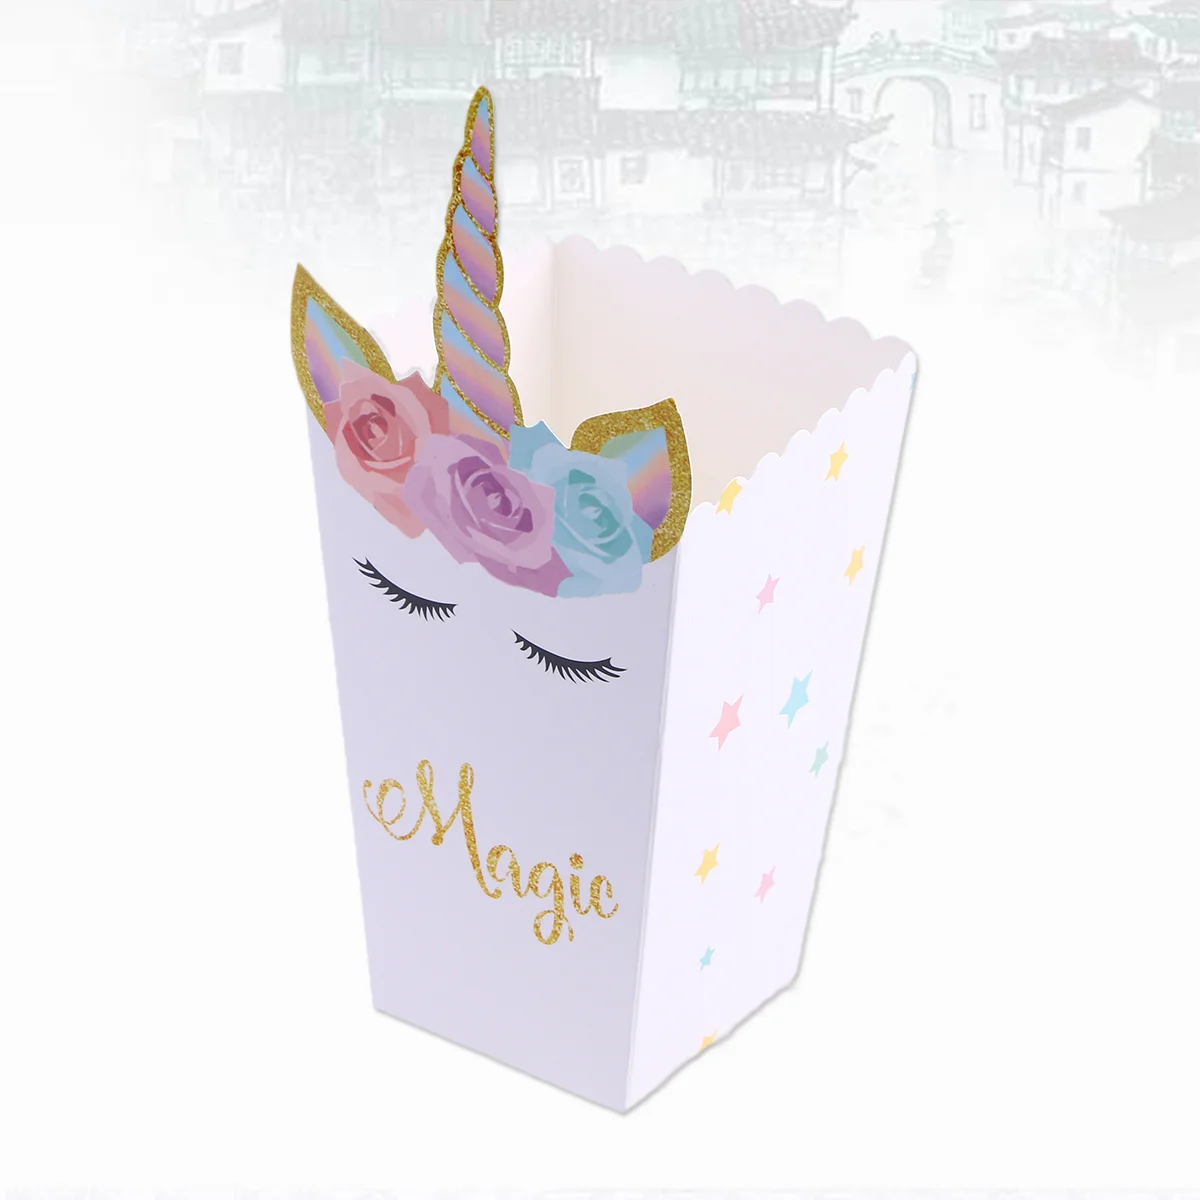 

Popcorn Party Box Boxes Candy Snack Container Favor Treat Decorations Paper Holders Pouches Movie Favors Holder Cookie Table